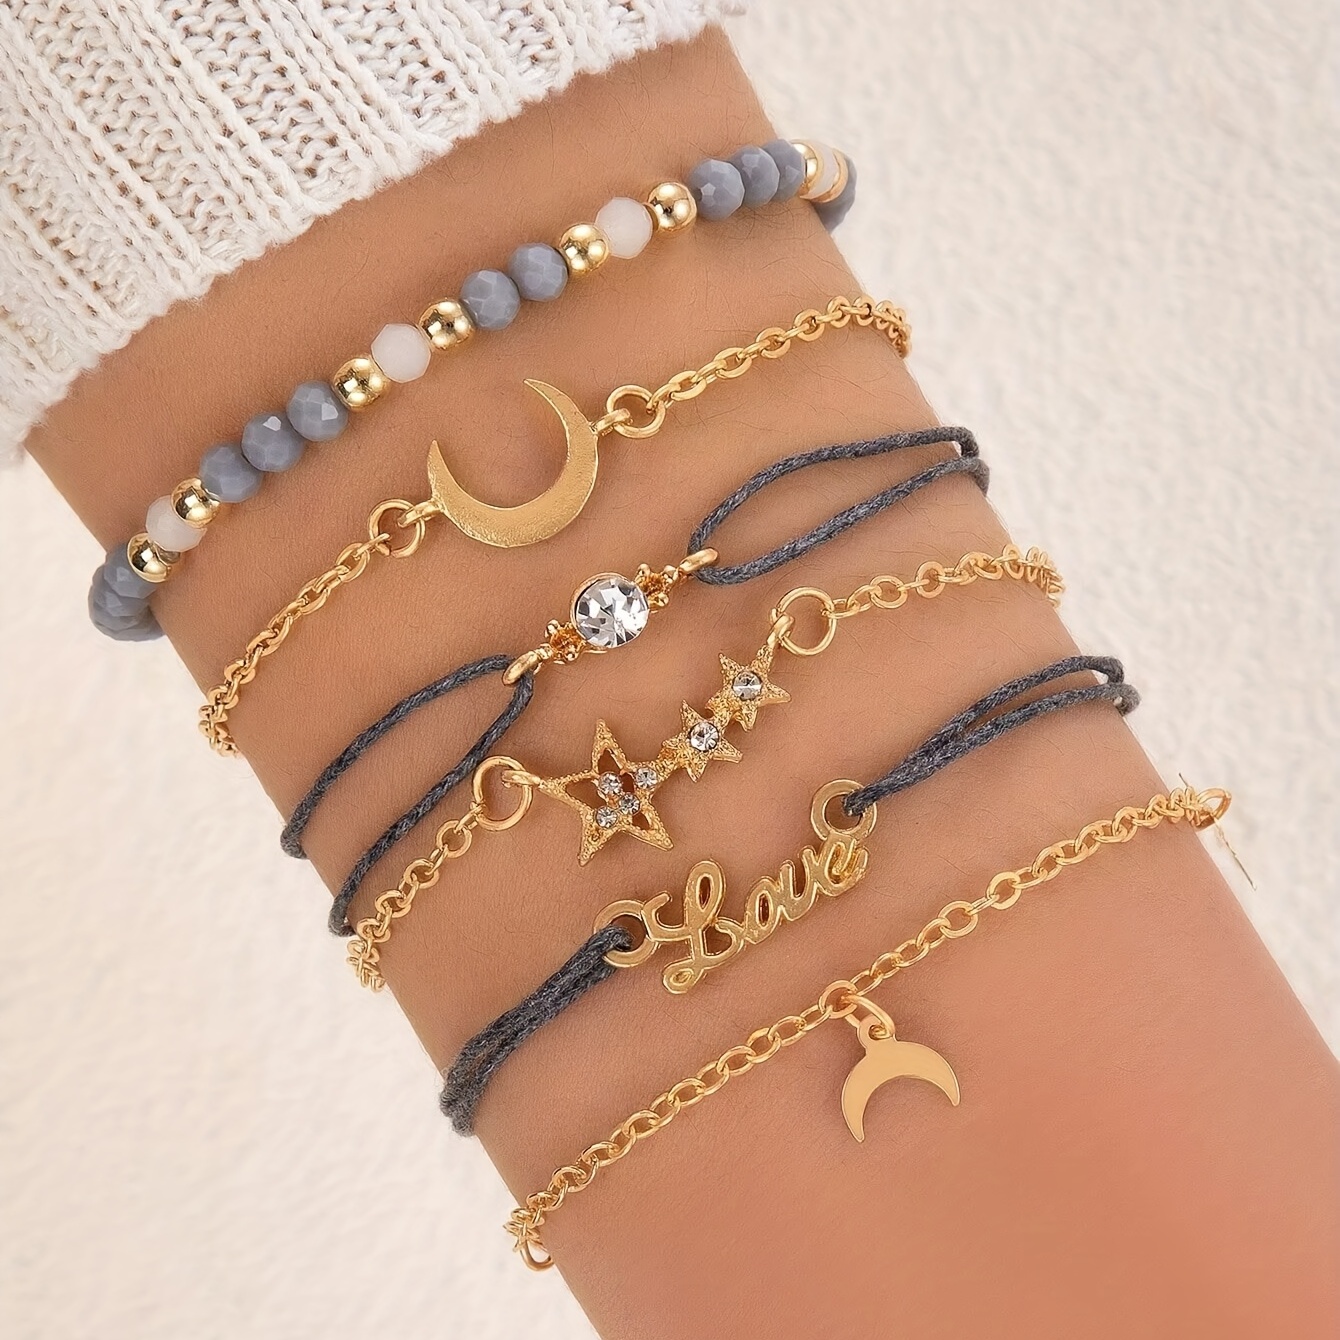 6 Pcs Rope Bracelet Set Adjustable Layered Hand Chain With Moon & Star  Shape Pendant Stackable Hand Jewelry for eid, ramadan